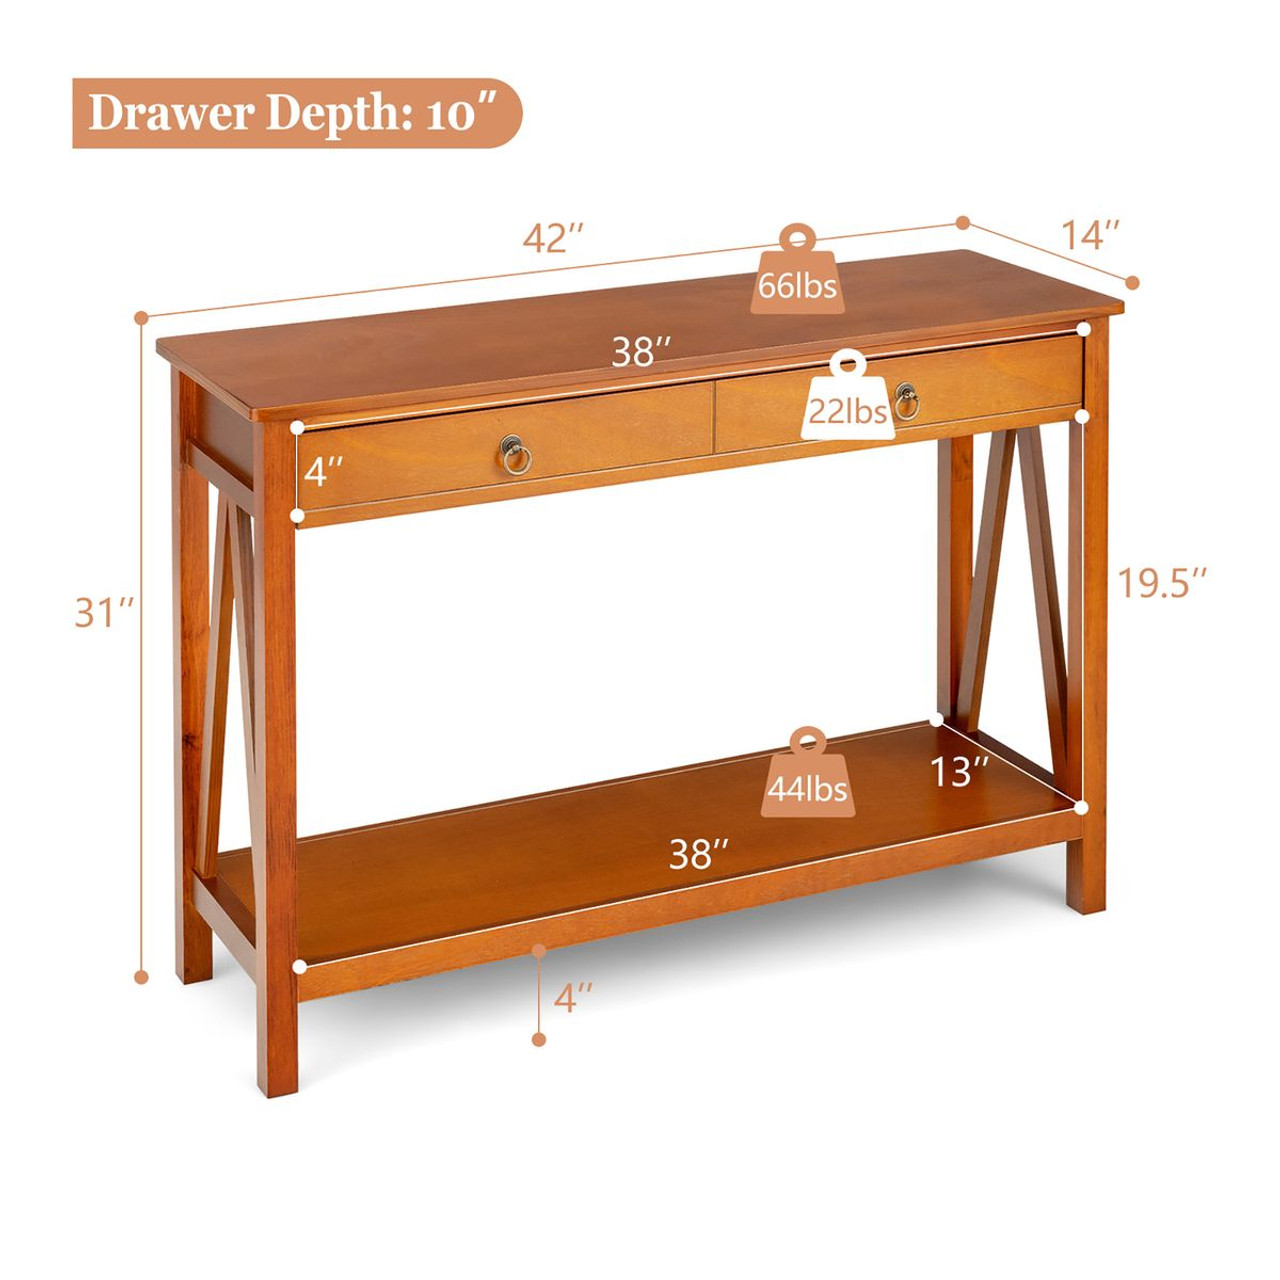 Console Table with Drawer Storage Shelf for Entryway Hallway product image